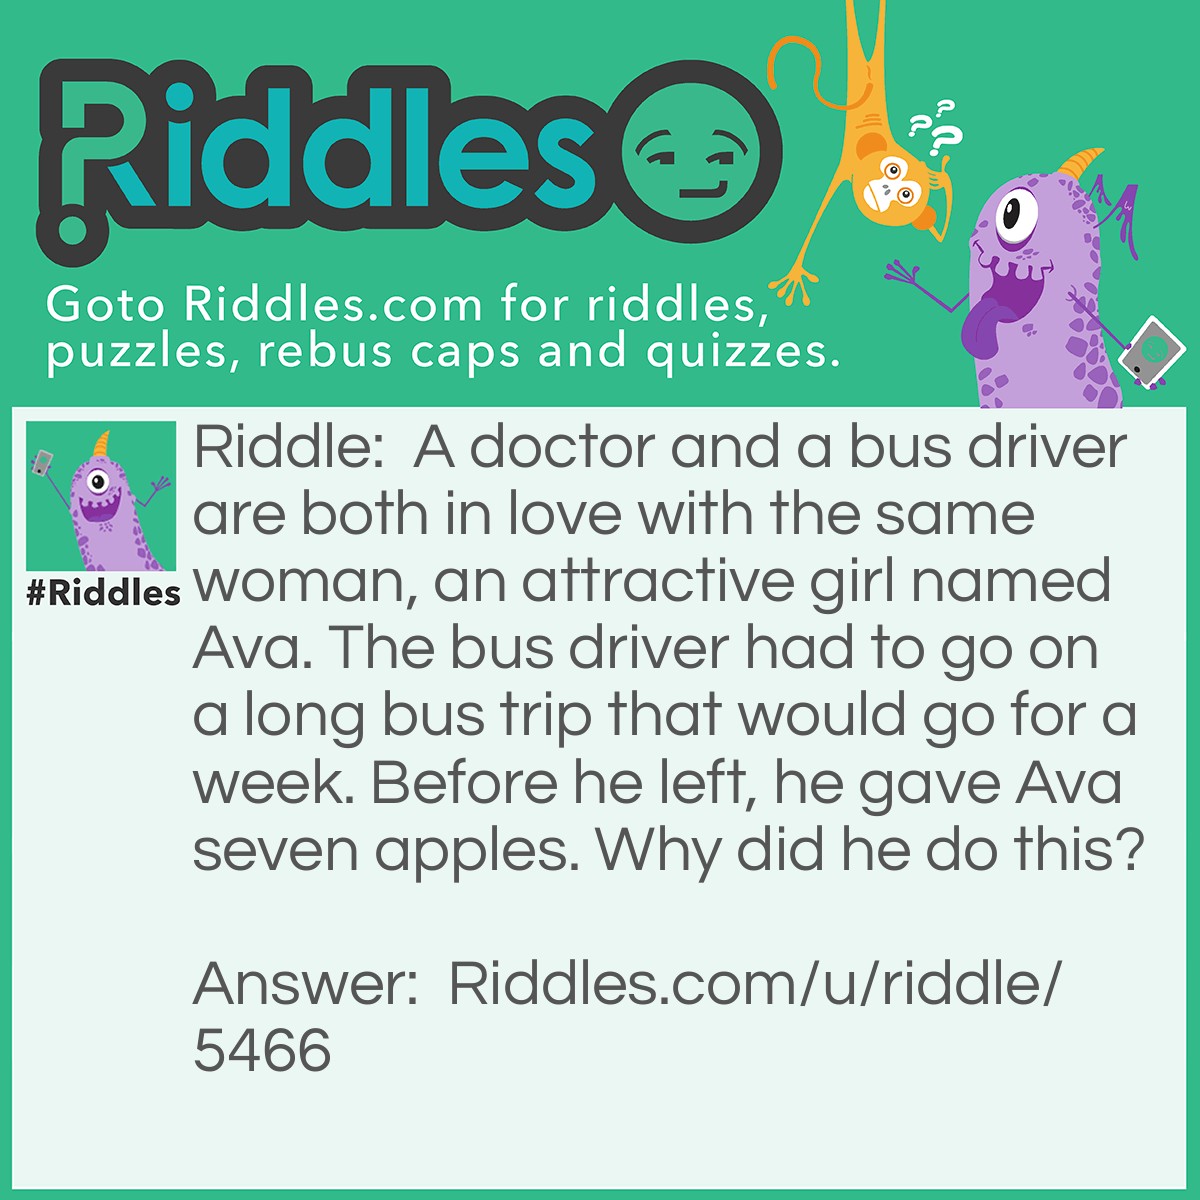 Riddle: A doctor and a bus driver are both in love with the same woman, an attractive girl named Ava. The bus driver had to go on a long bus trip that would go for a week. Before he left, he gave Ava seven apples. Why did he do this? Answer: Because an apple a day keeps the doctor away!